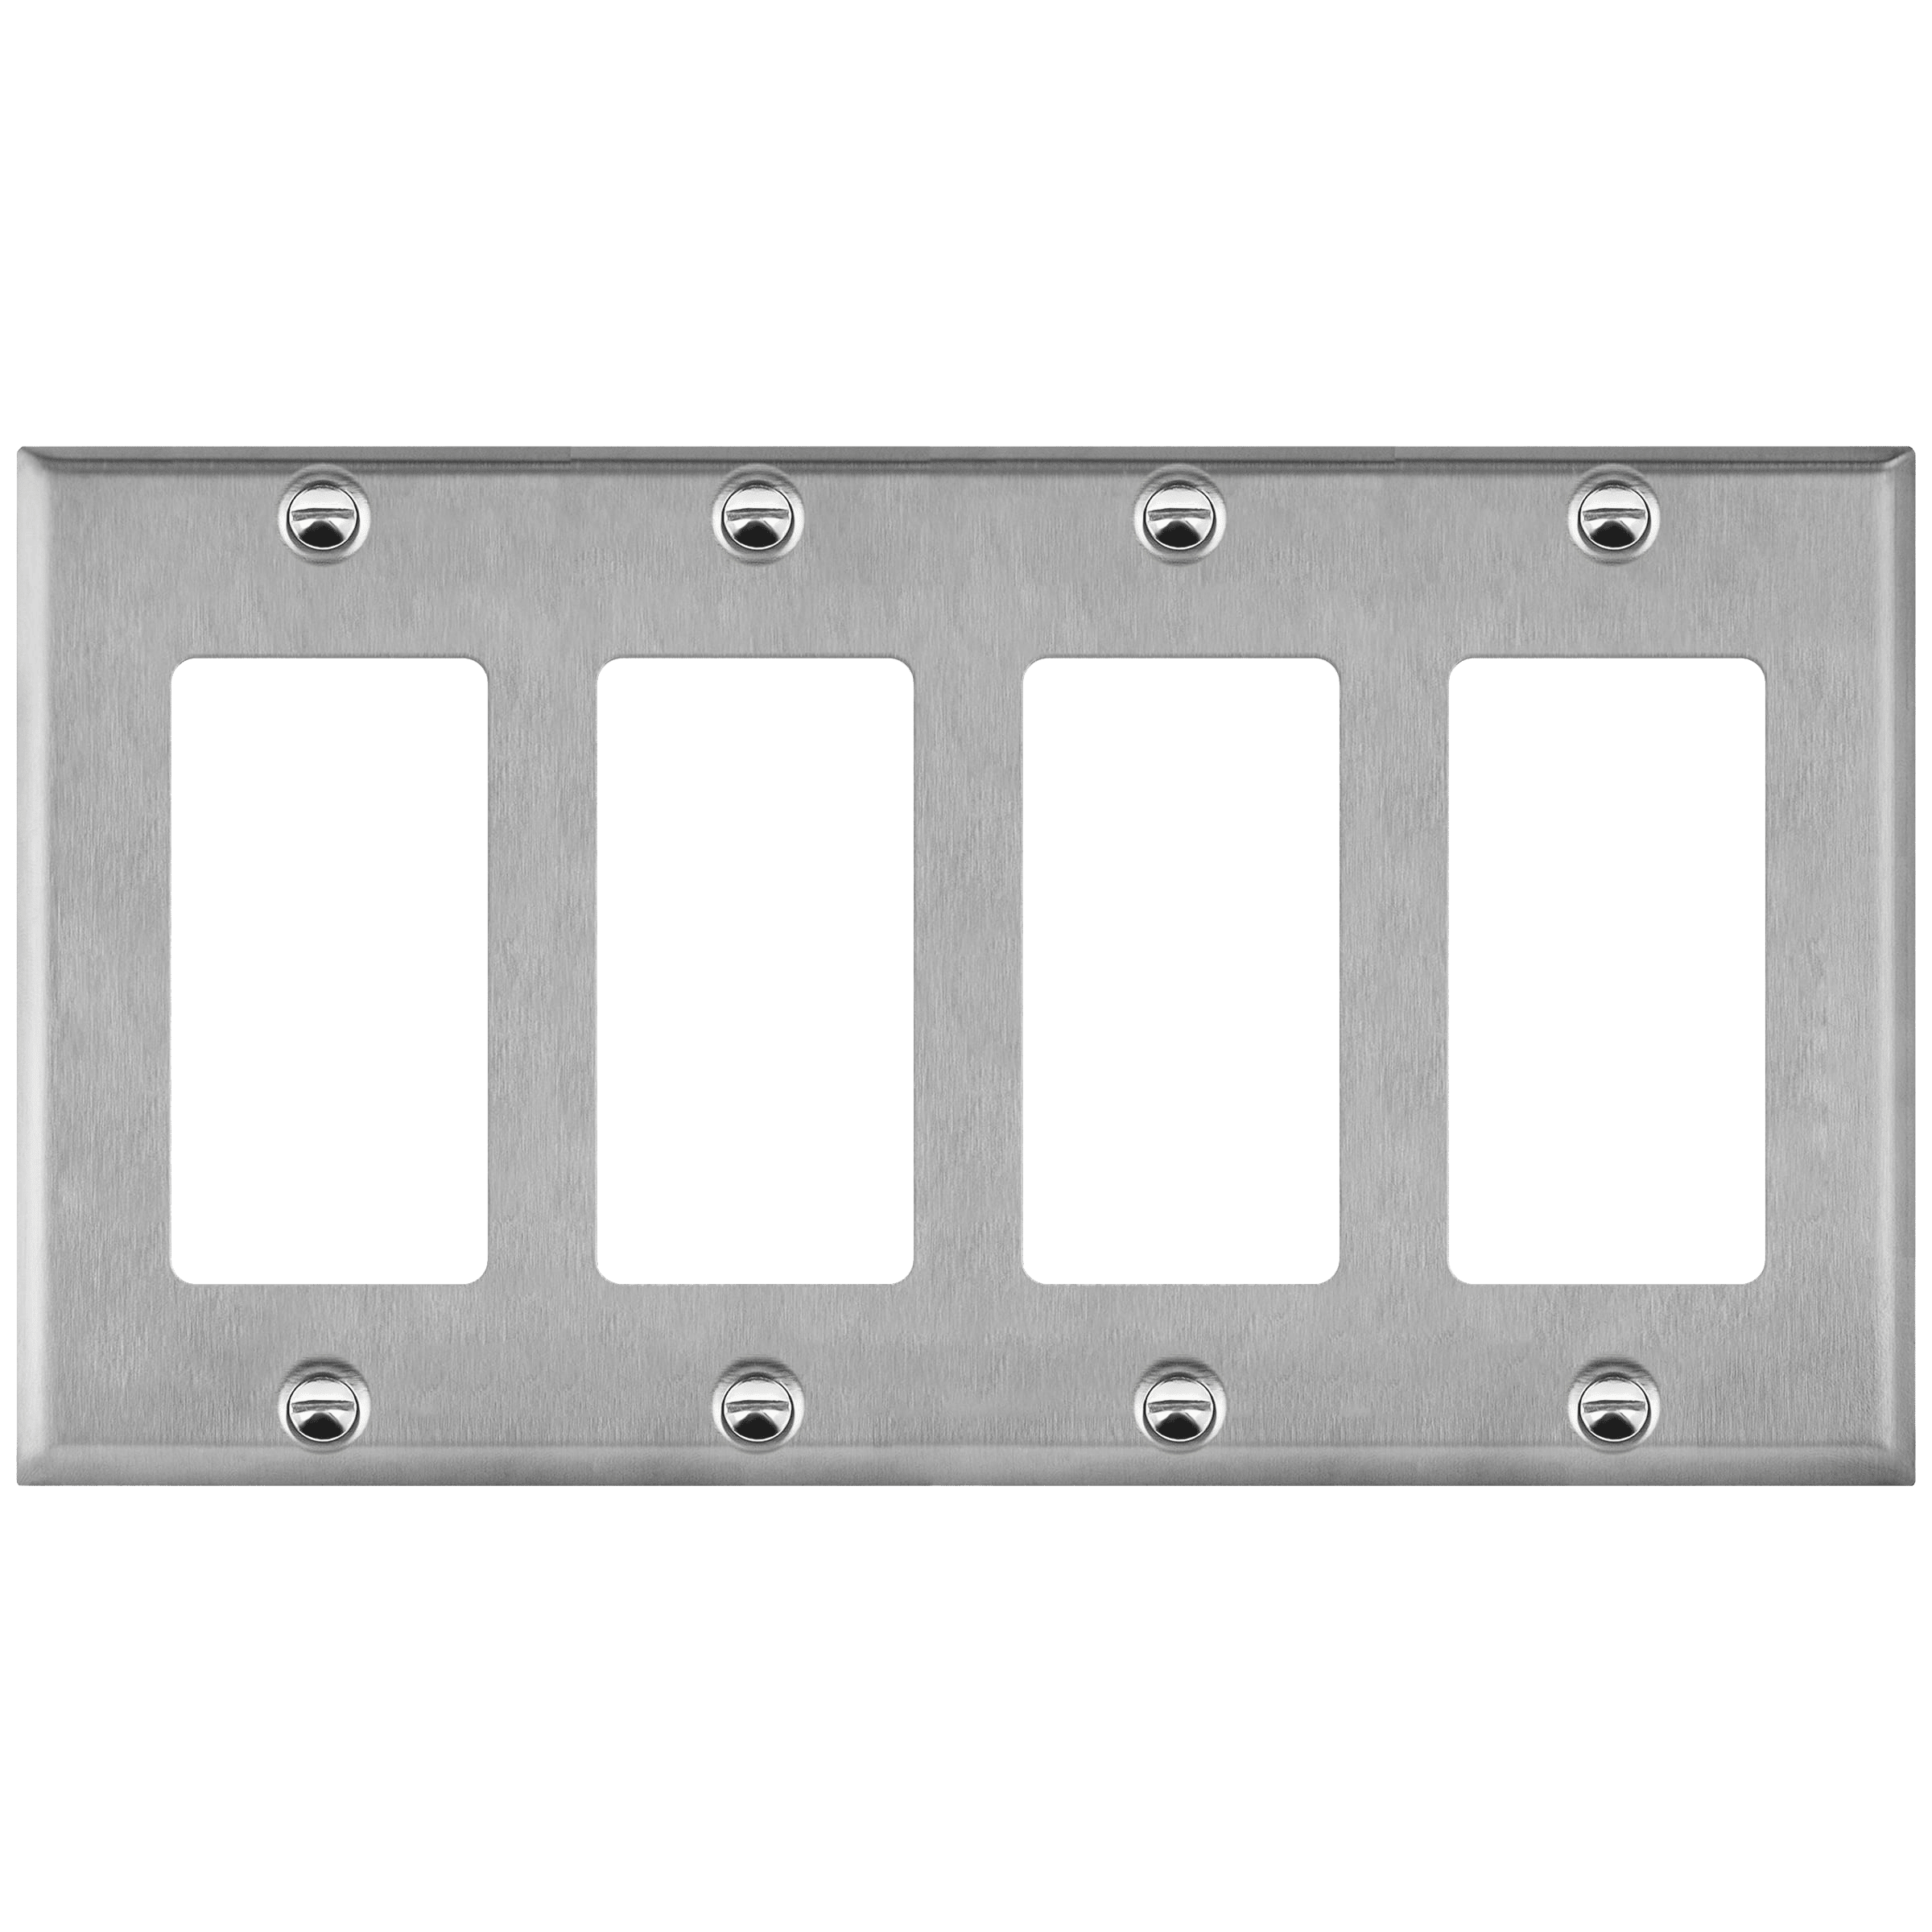 4-Gang Metal Decorator Outlet Wall Plate